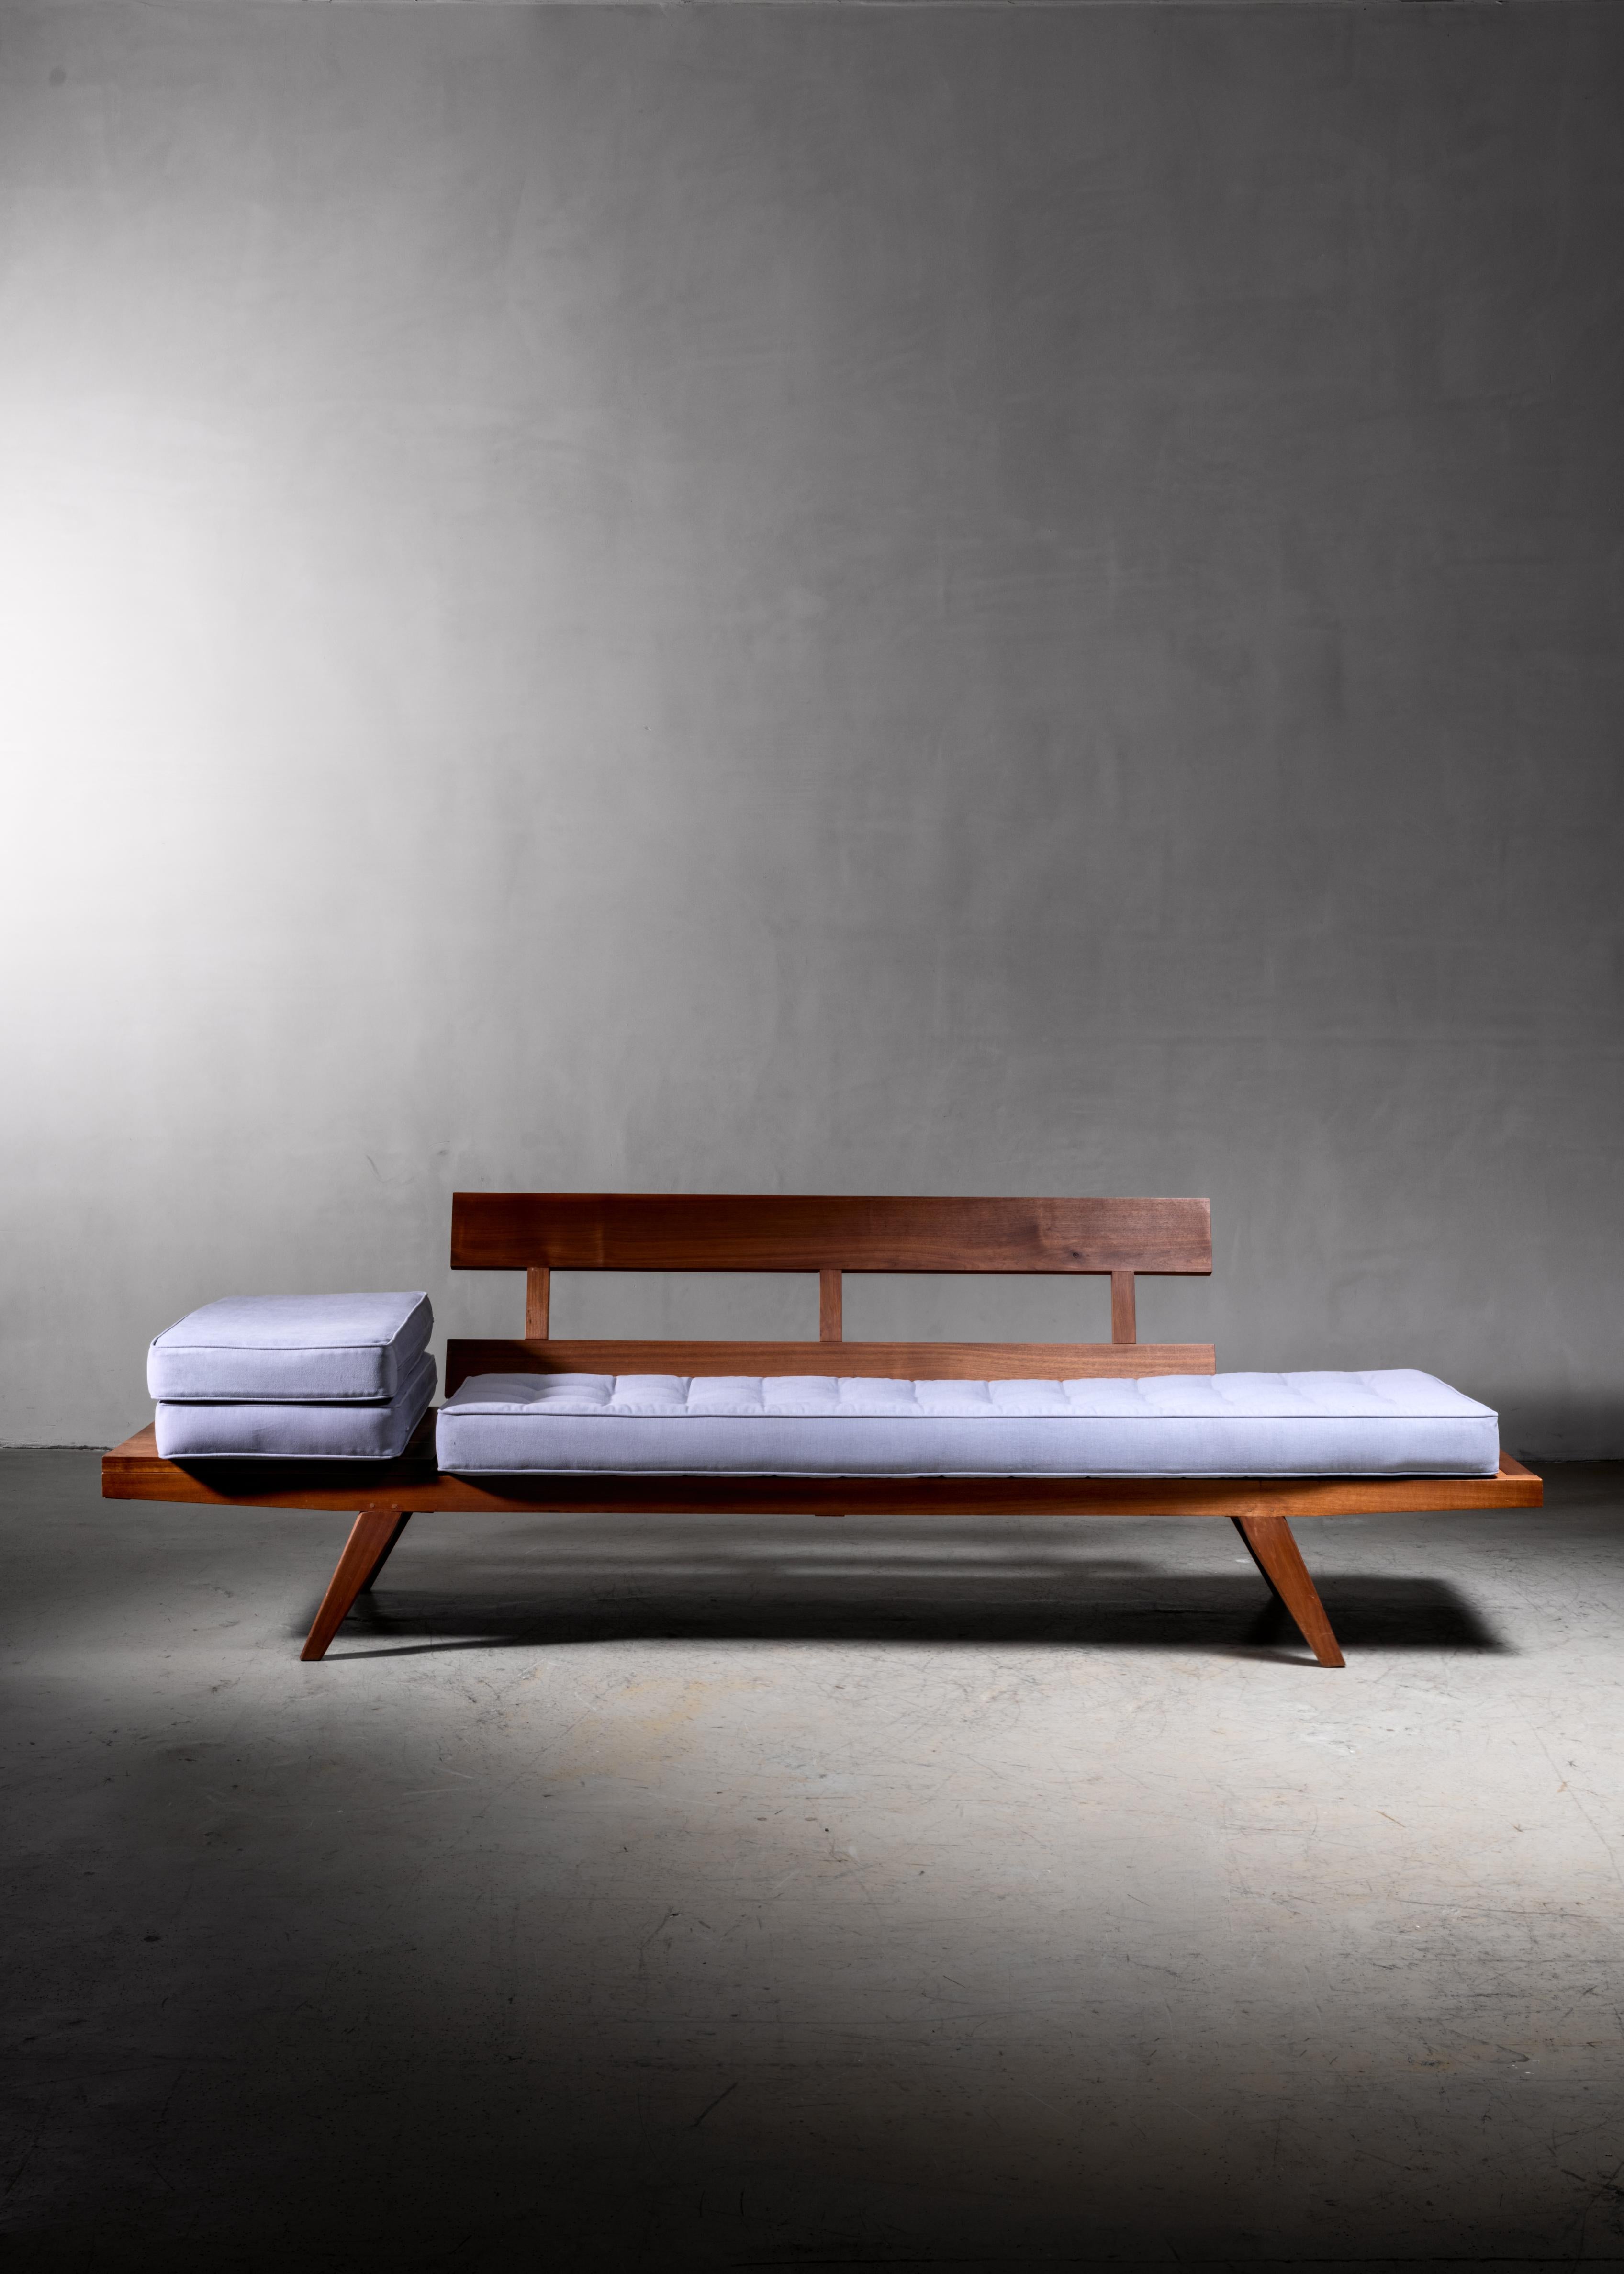 American Rude Osolnik Studio Crafted Wooden Sofa, USA, 1960s For Sale